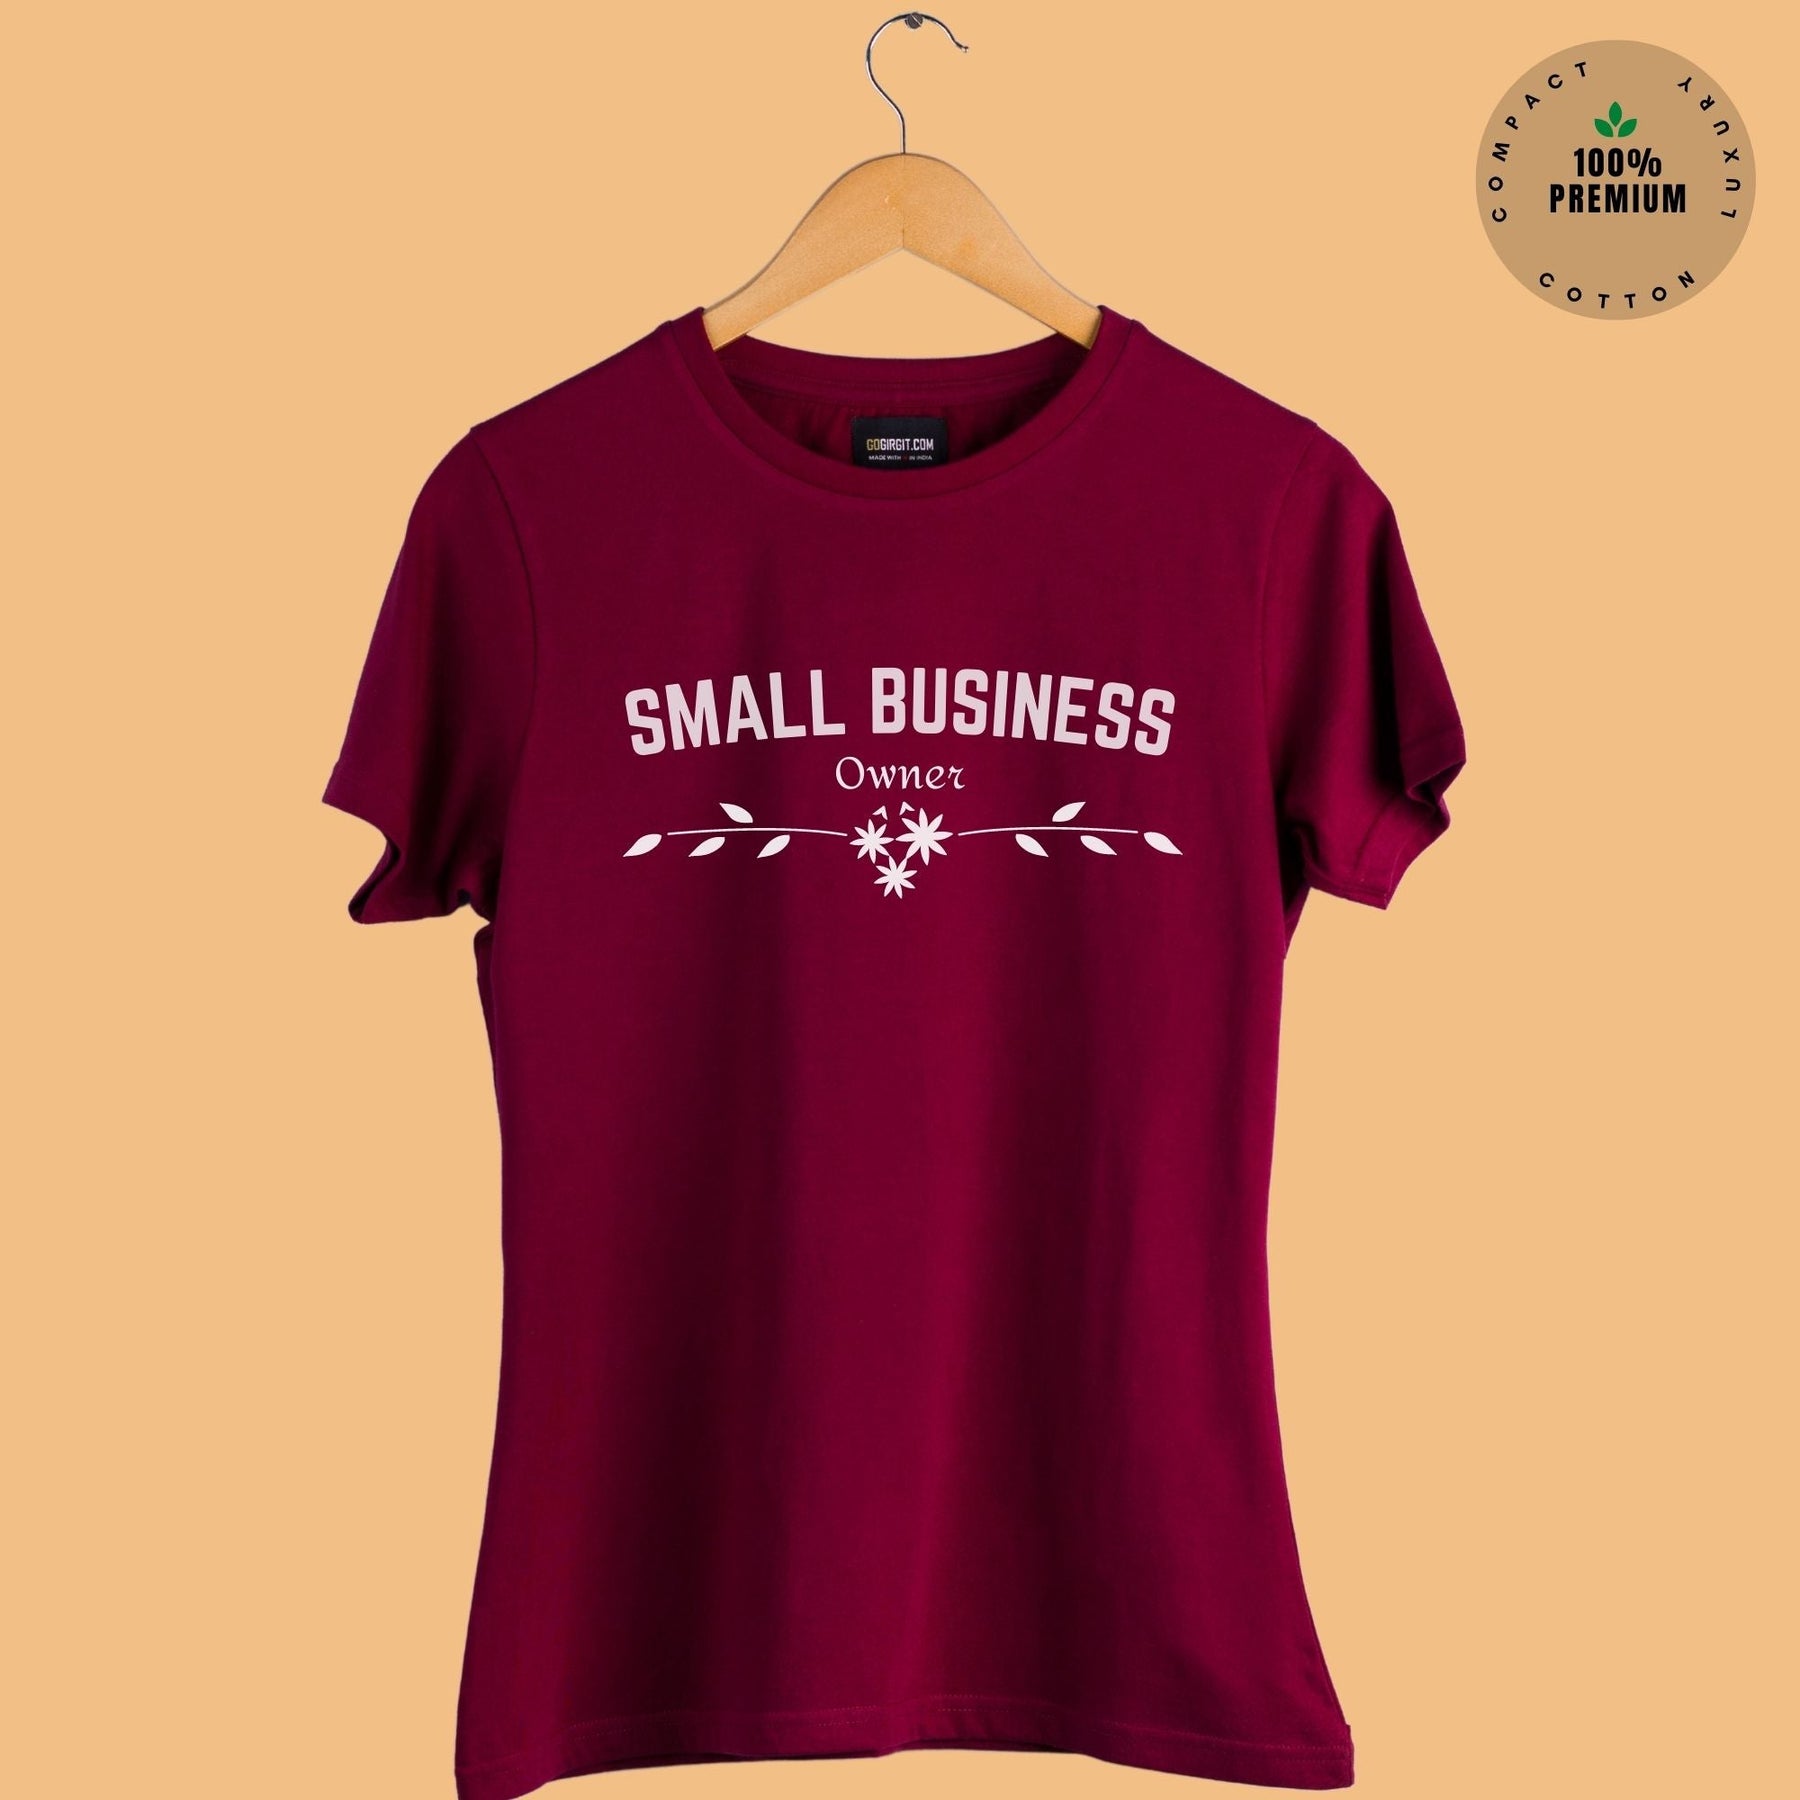 Small Business Owner Women's Half Sleeve Maroon T-shirt